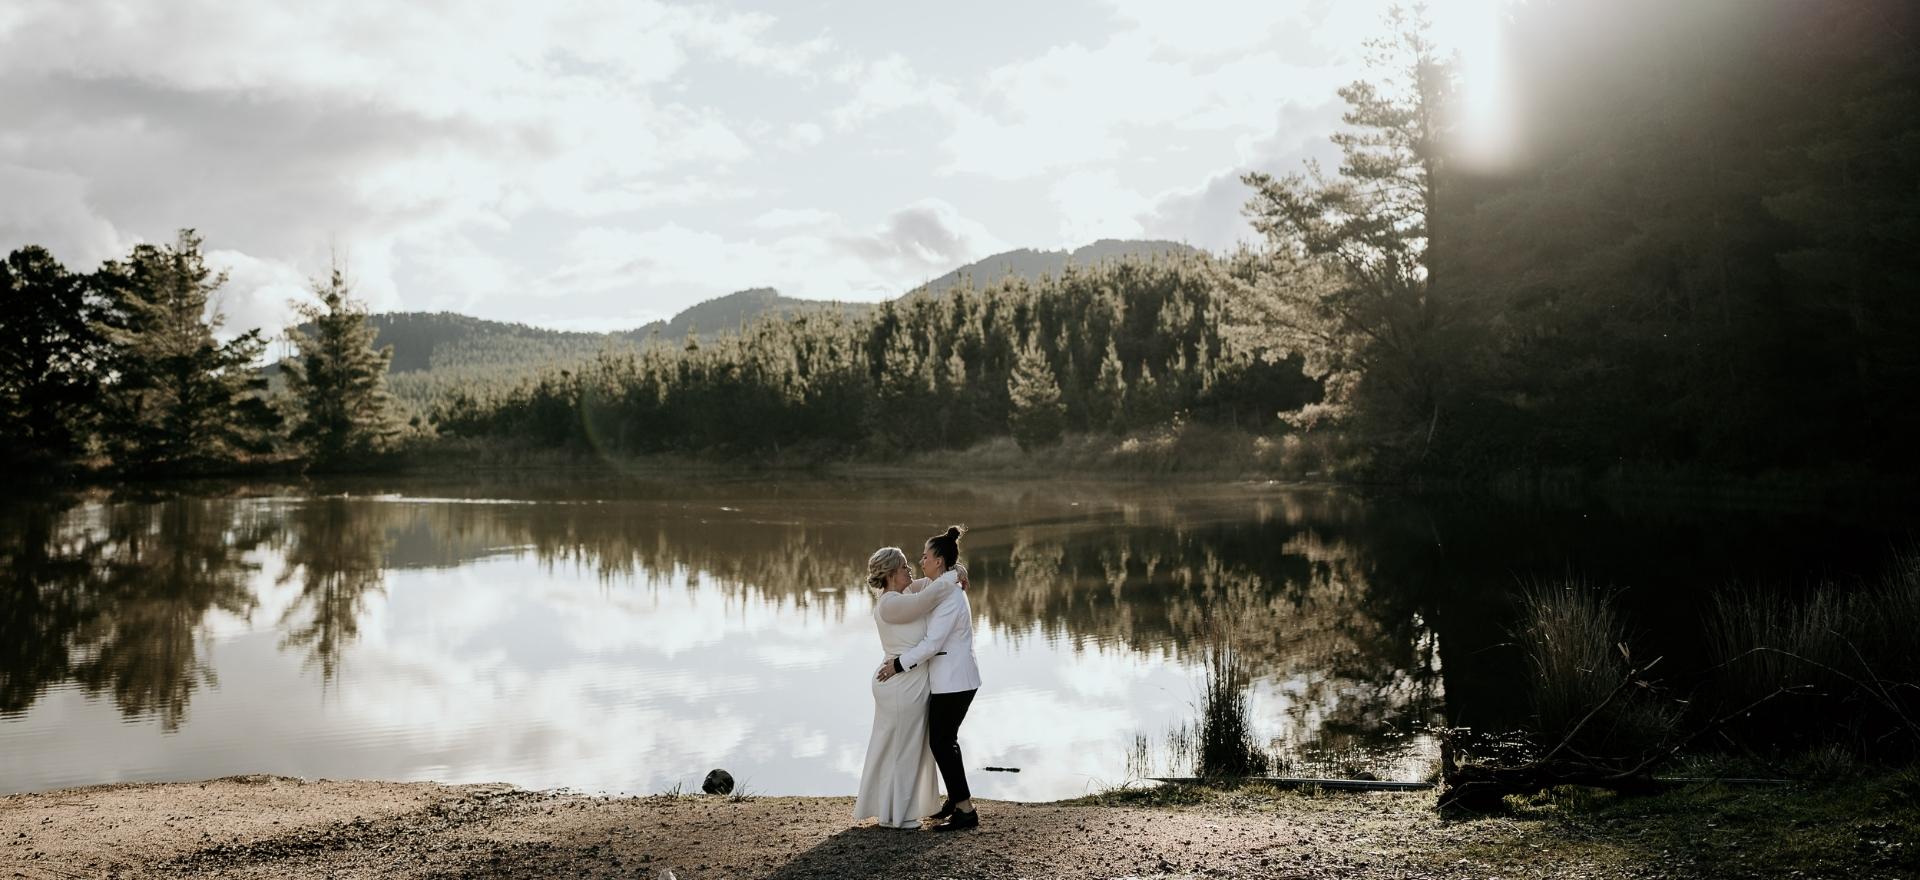 Brides embrace down by a lake during the filming of their intimate wedding